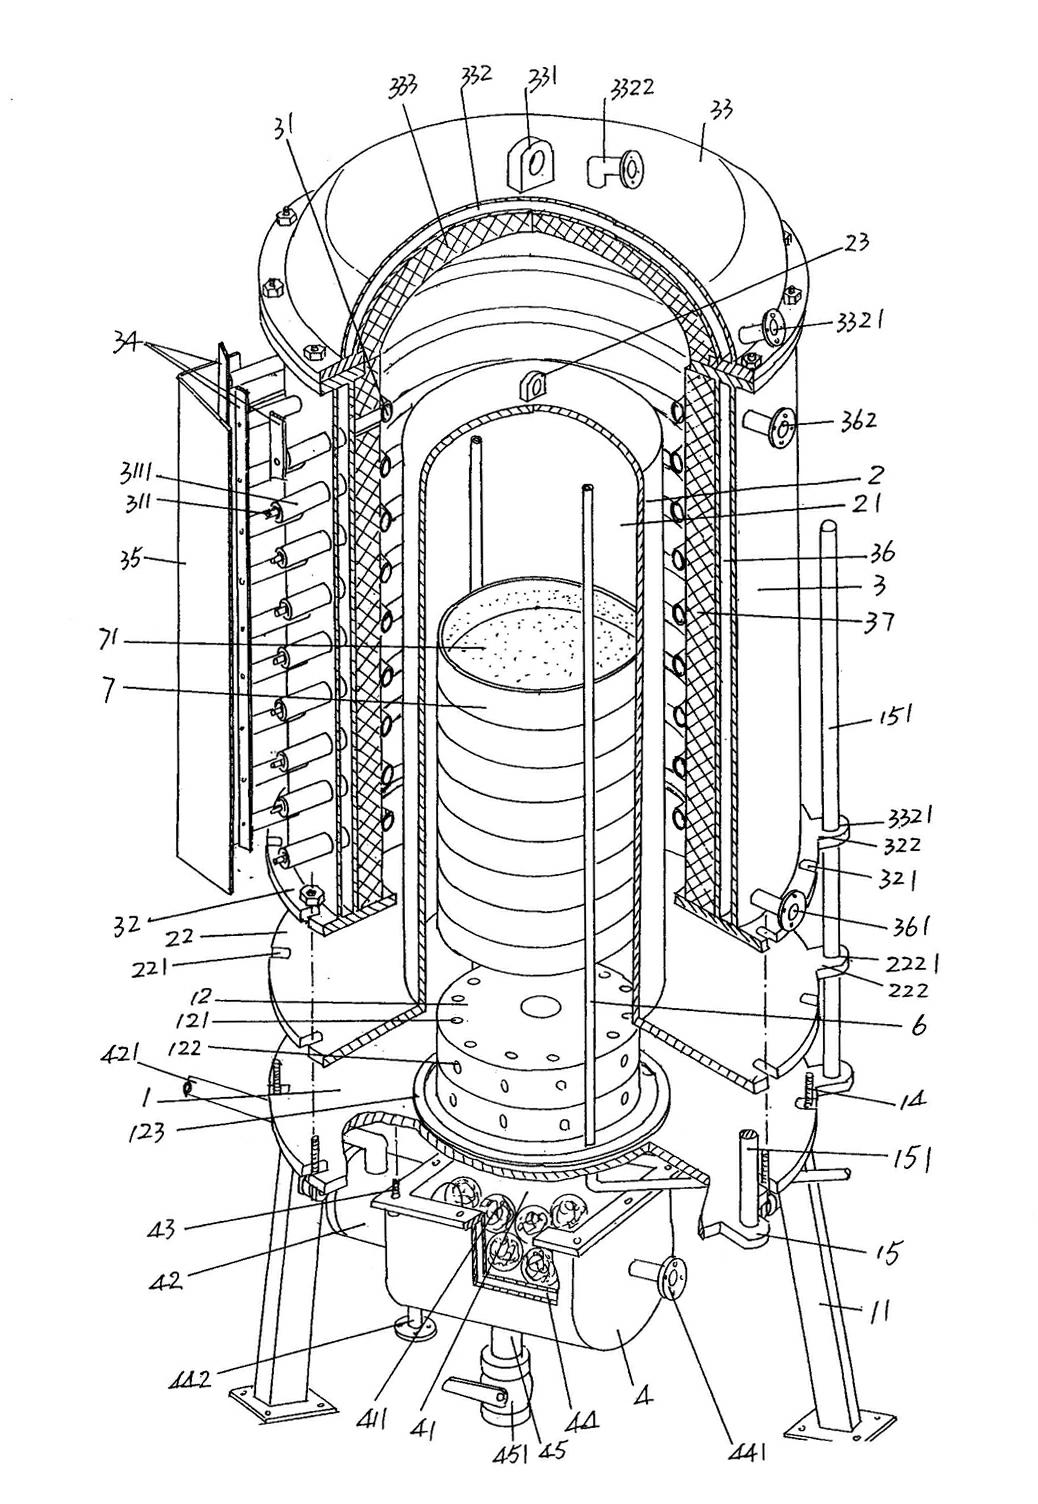 Degreasing device